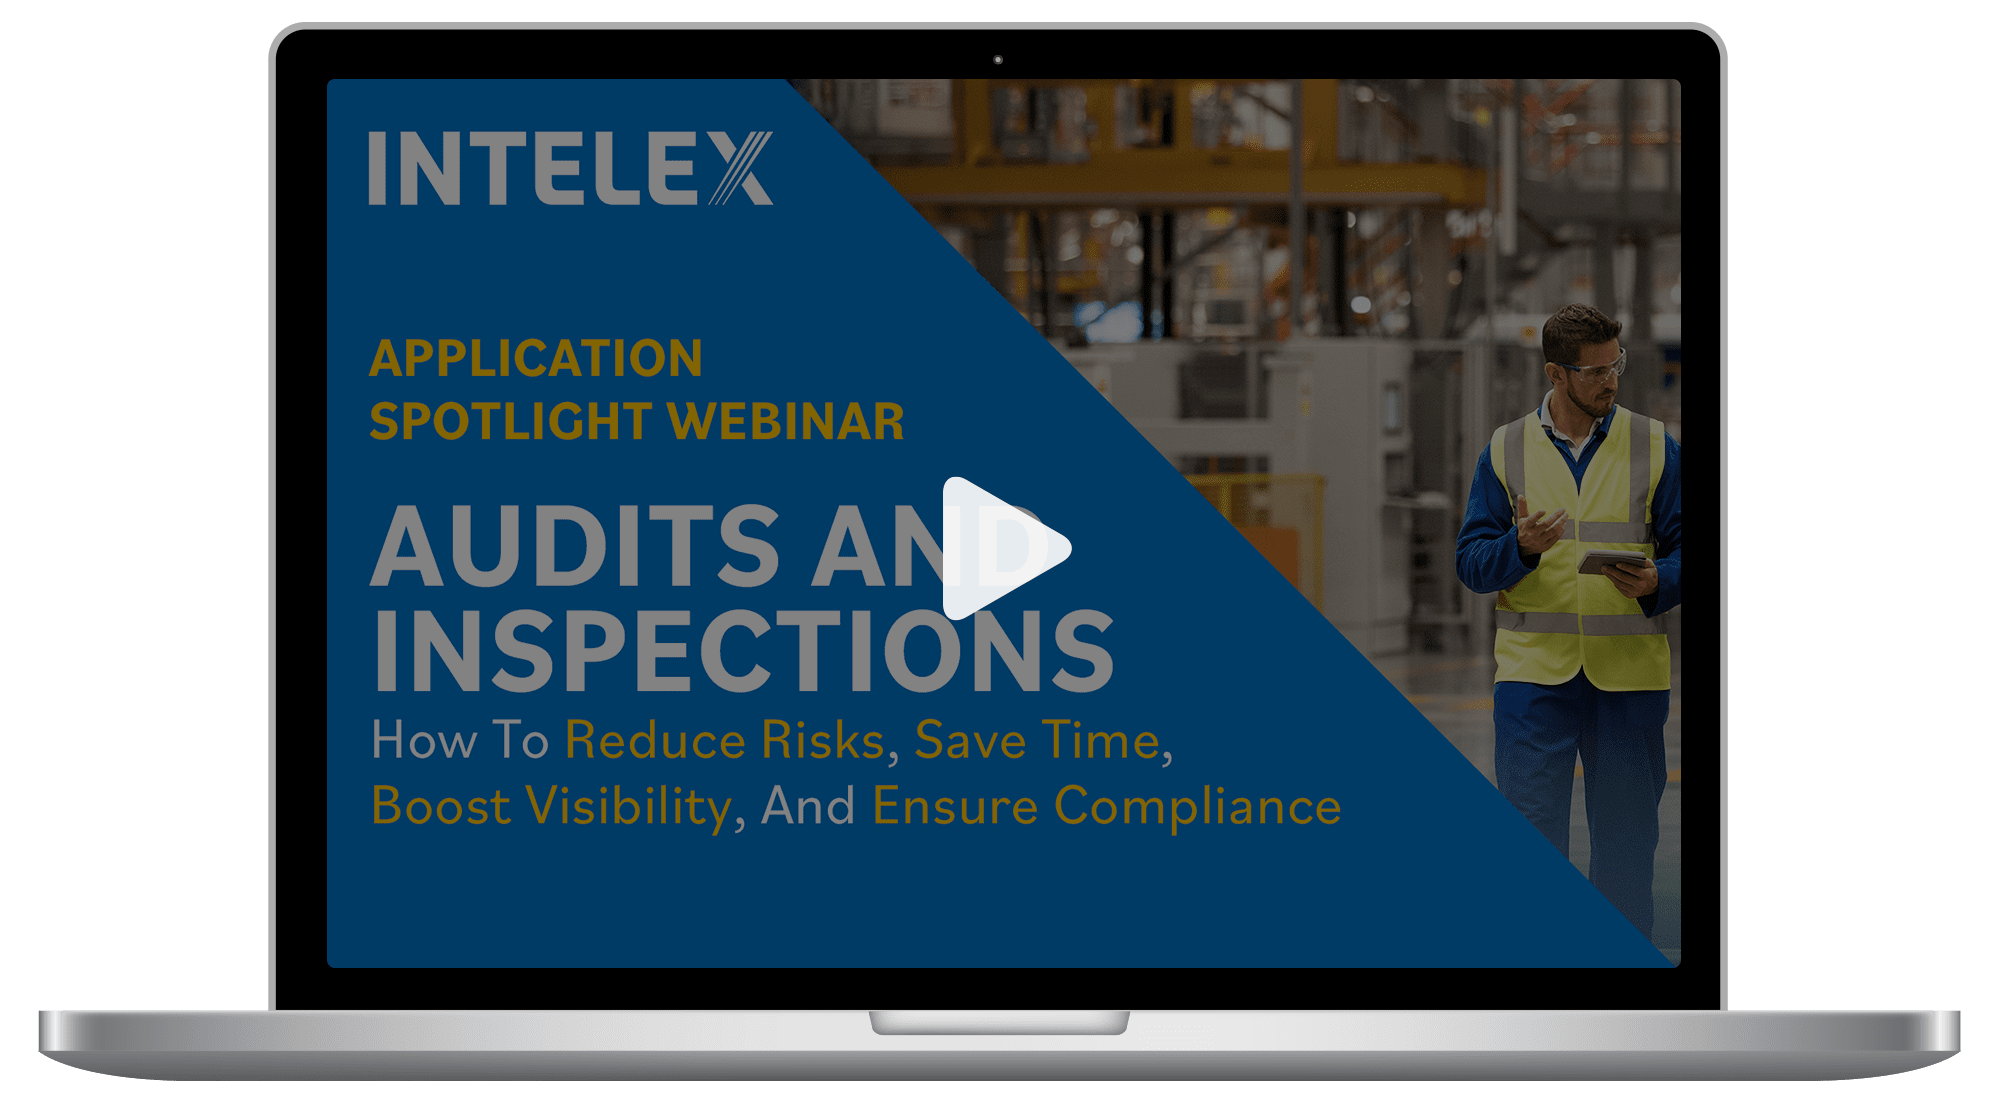 Audits and Inspections Software Demo - Intelex